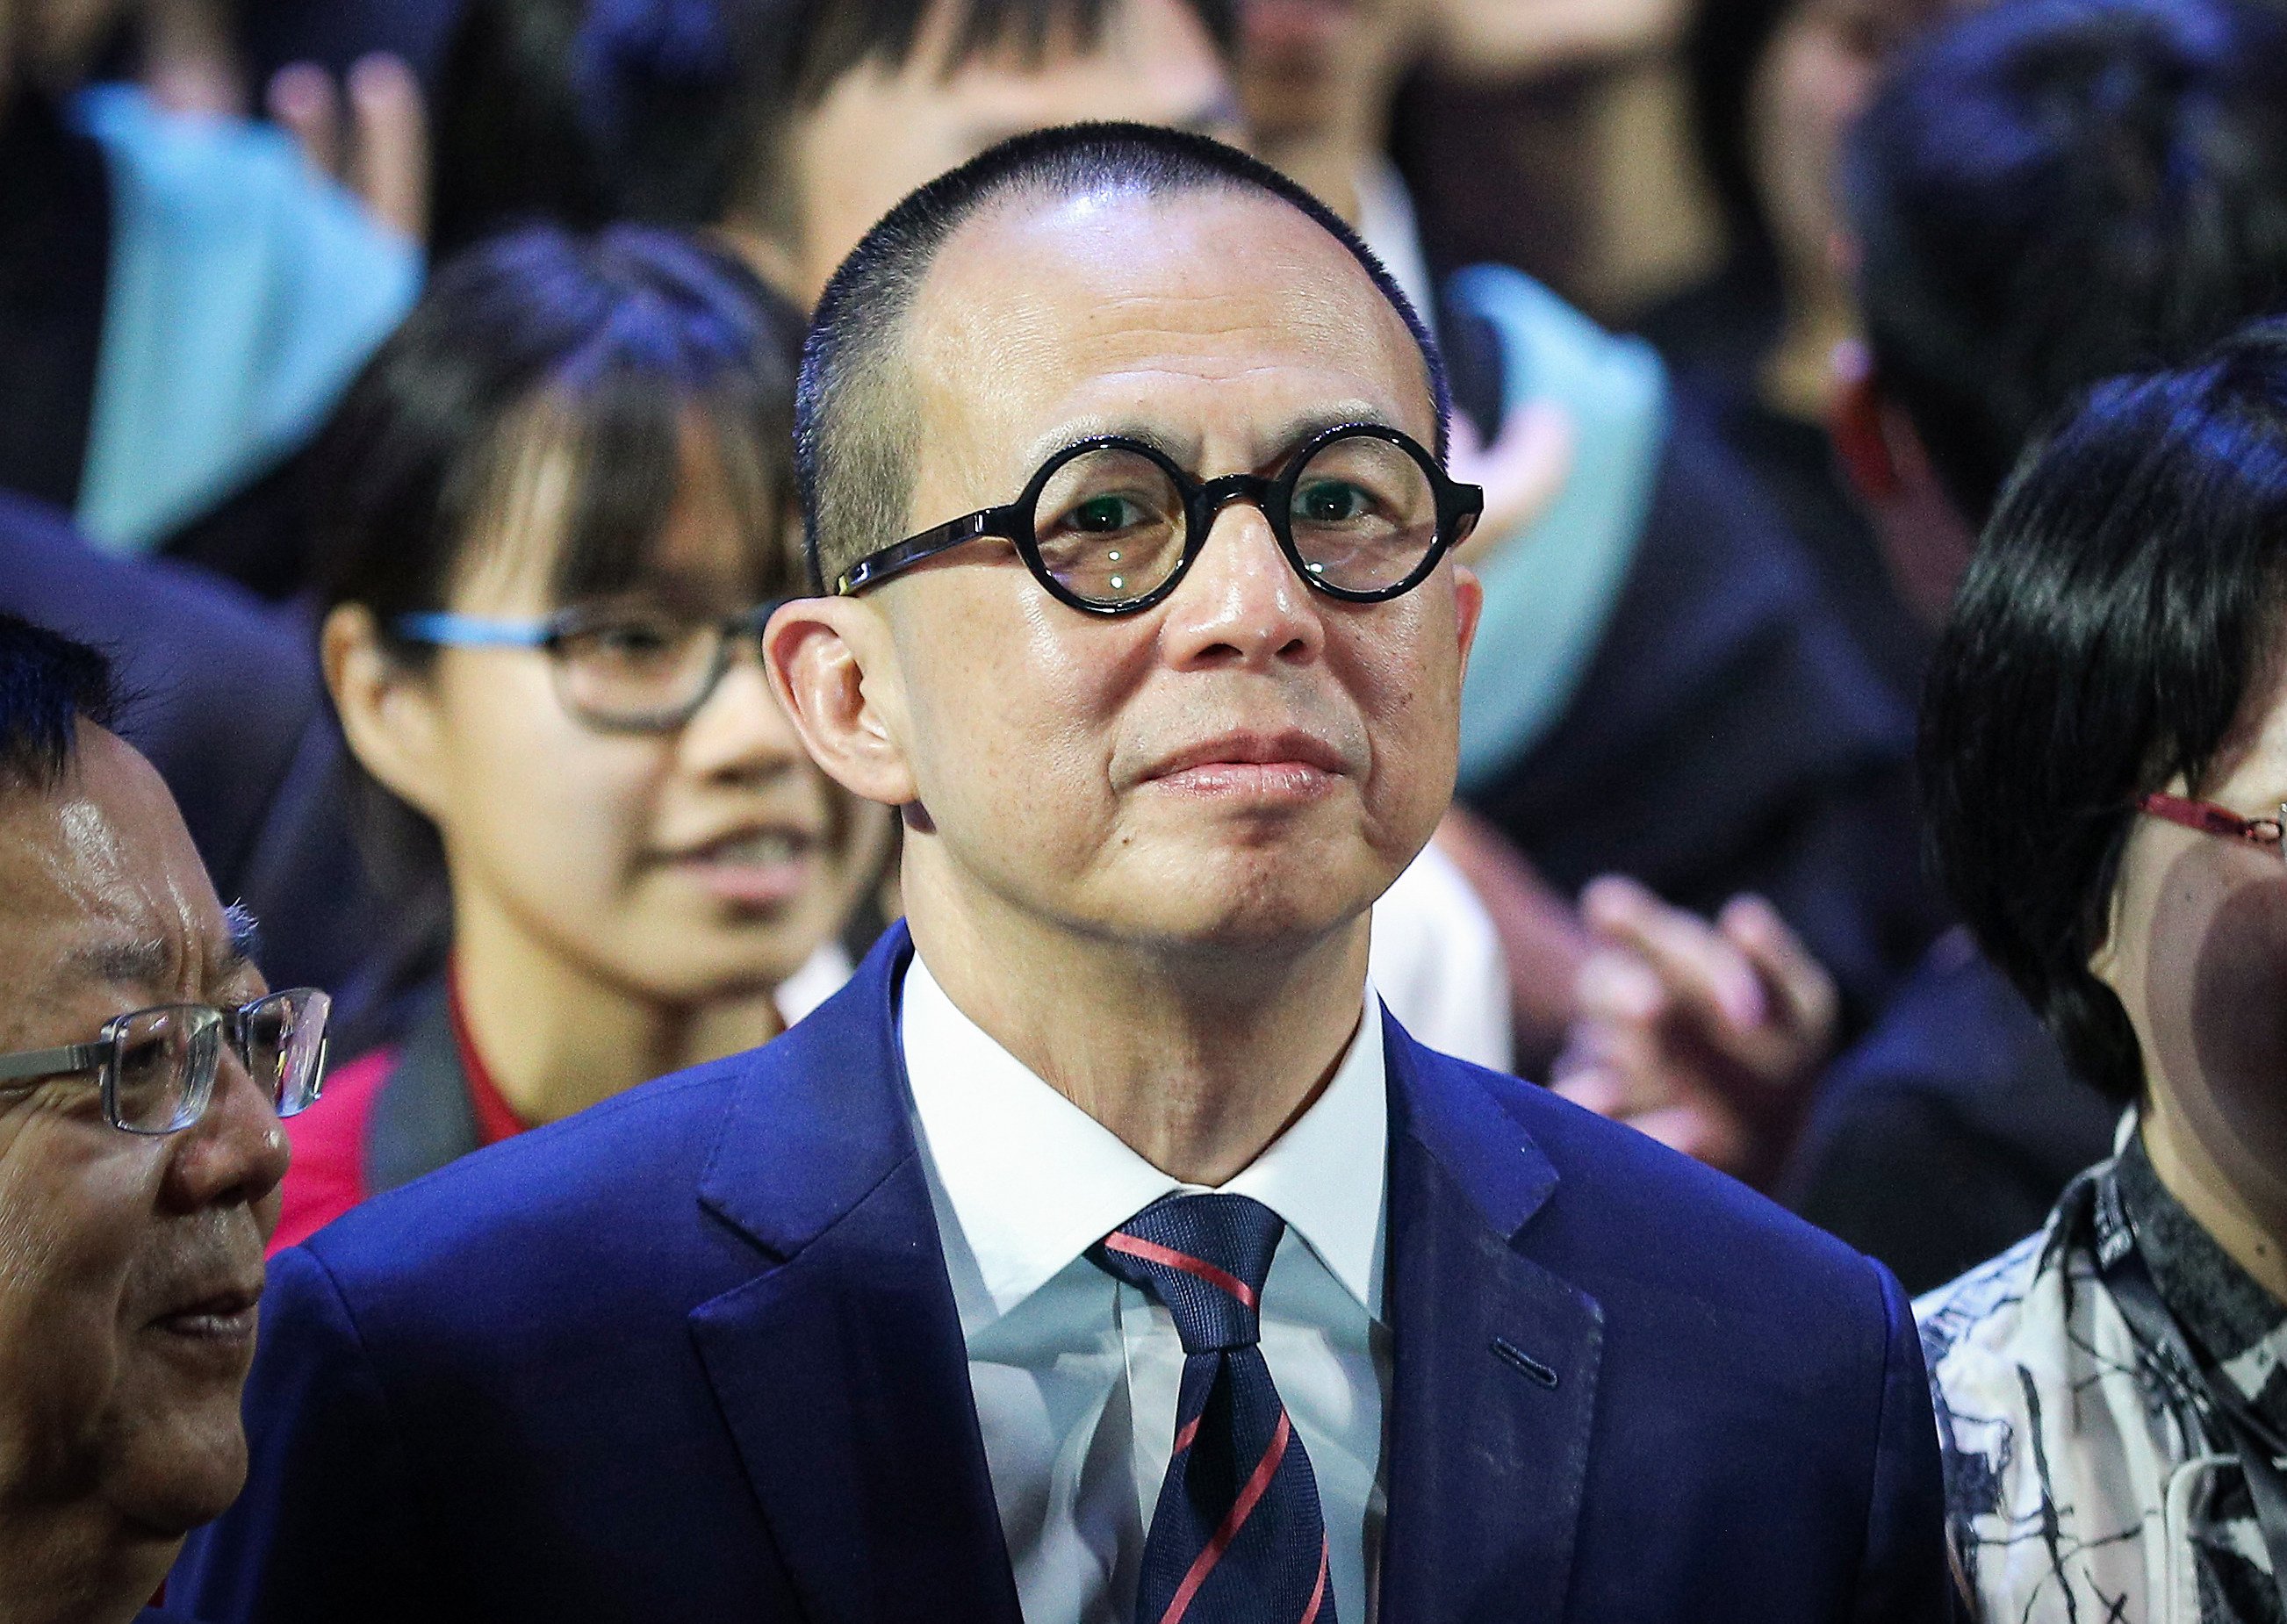 Hong Kong tycoon Richard Li Tzar-kai will speak during a session on Hong Kong’s ability to finance technological innovation, according to a company spokesperson. Photo: Getty Images